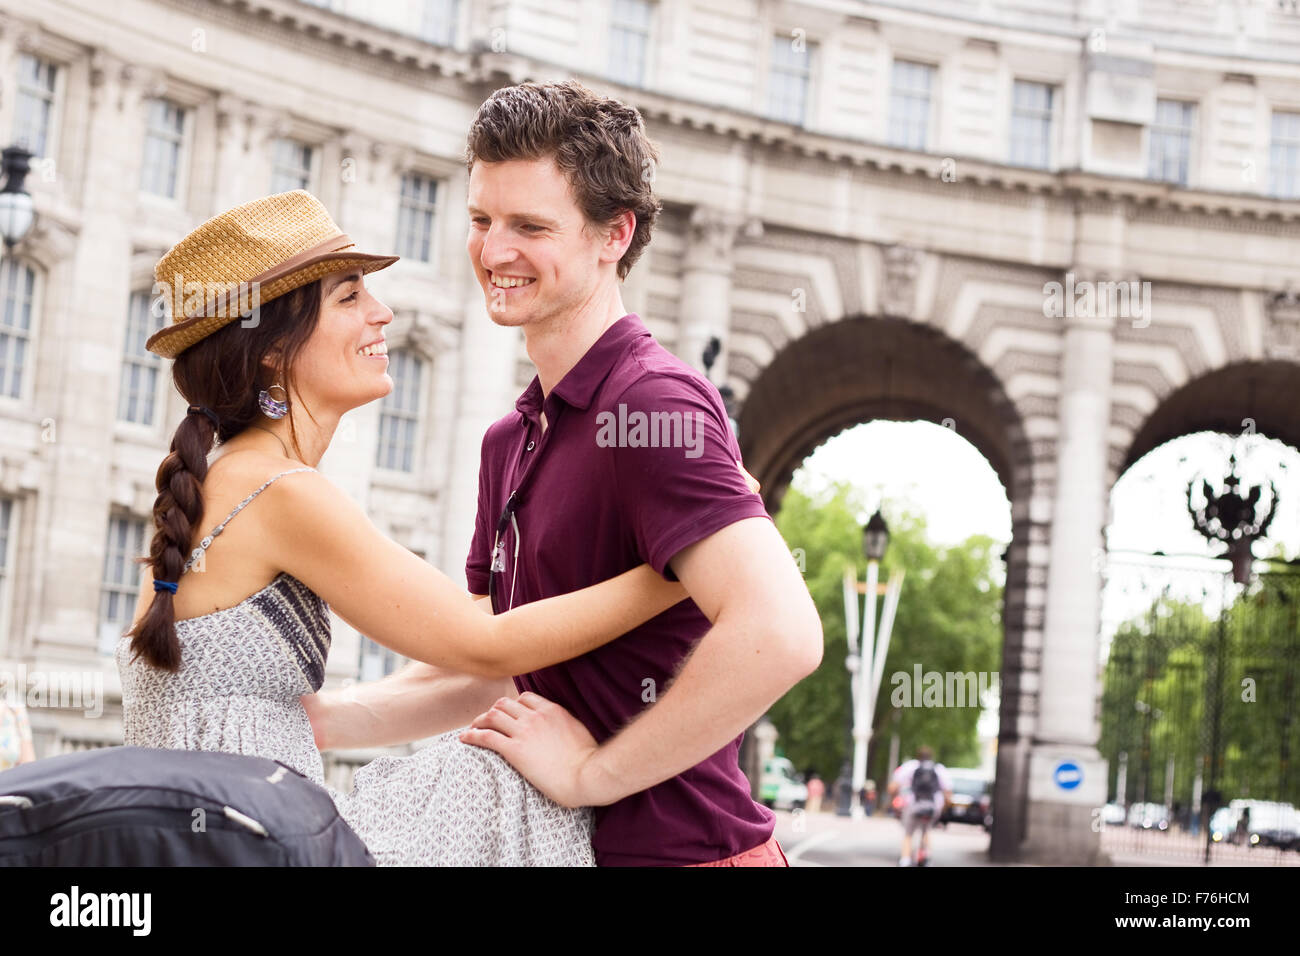 happy couple enjoying their day together Stock Photo